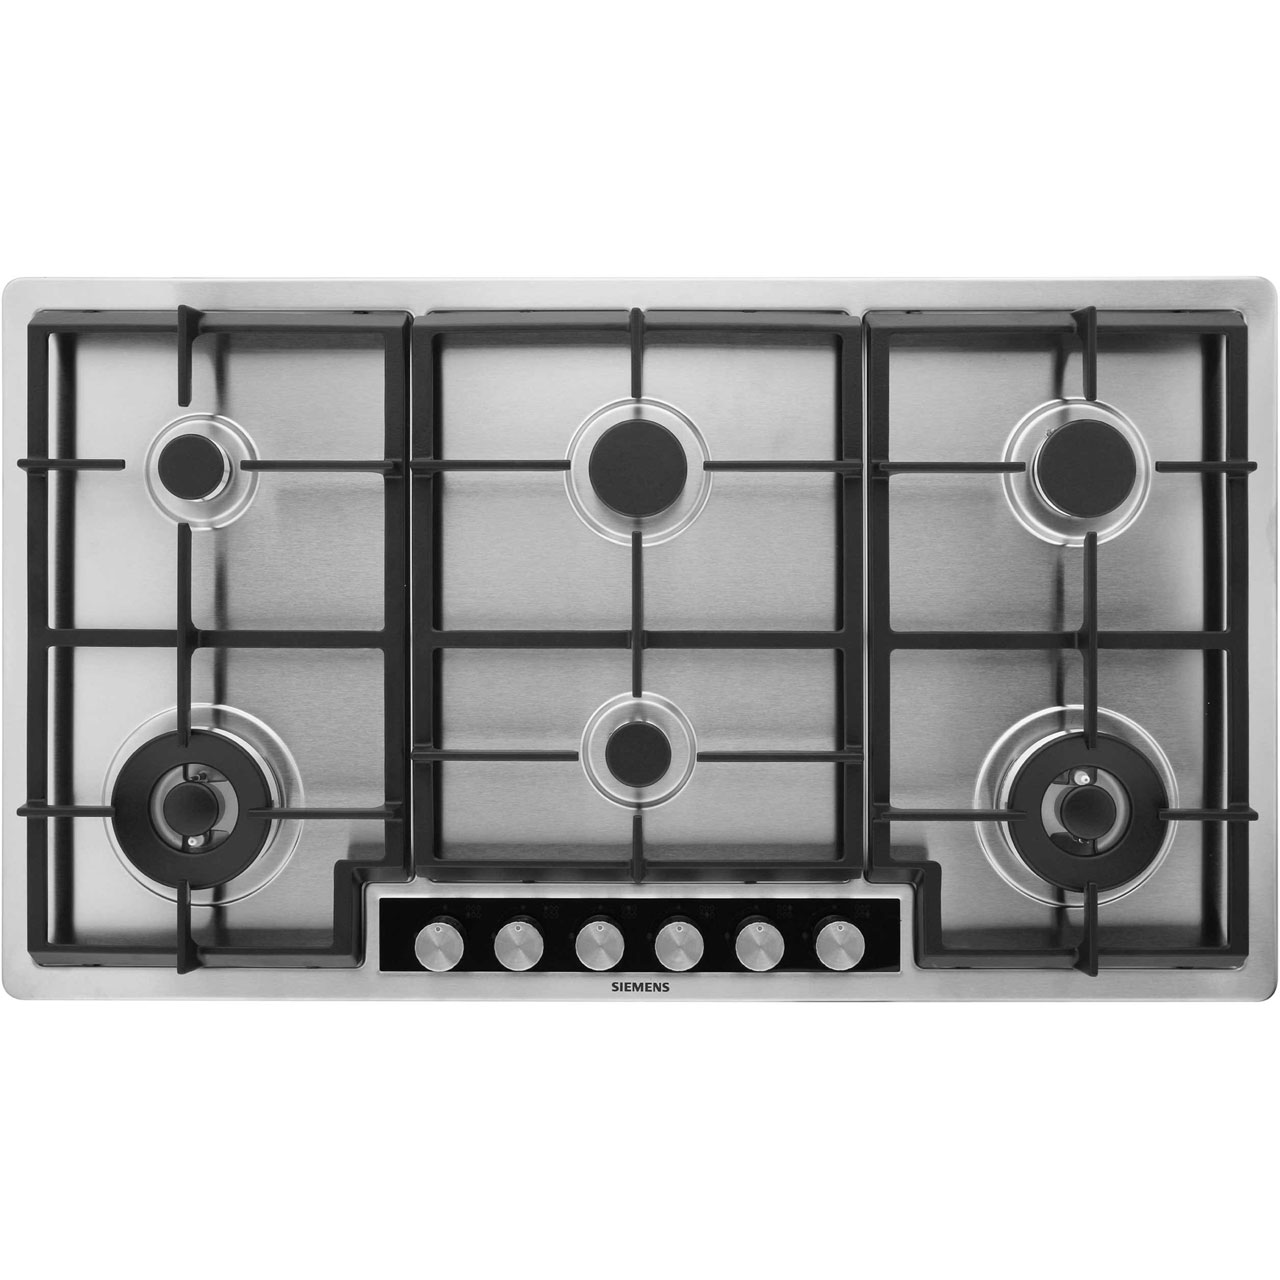 Siemens IQ-500 EC945TB91E Integrated Gas Hob in Stainless Steel